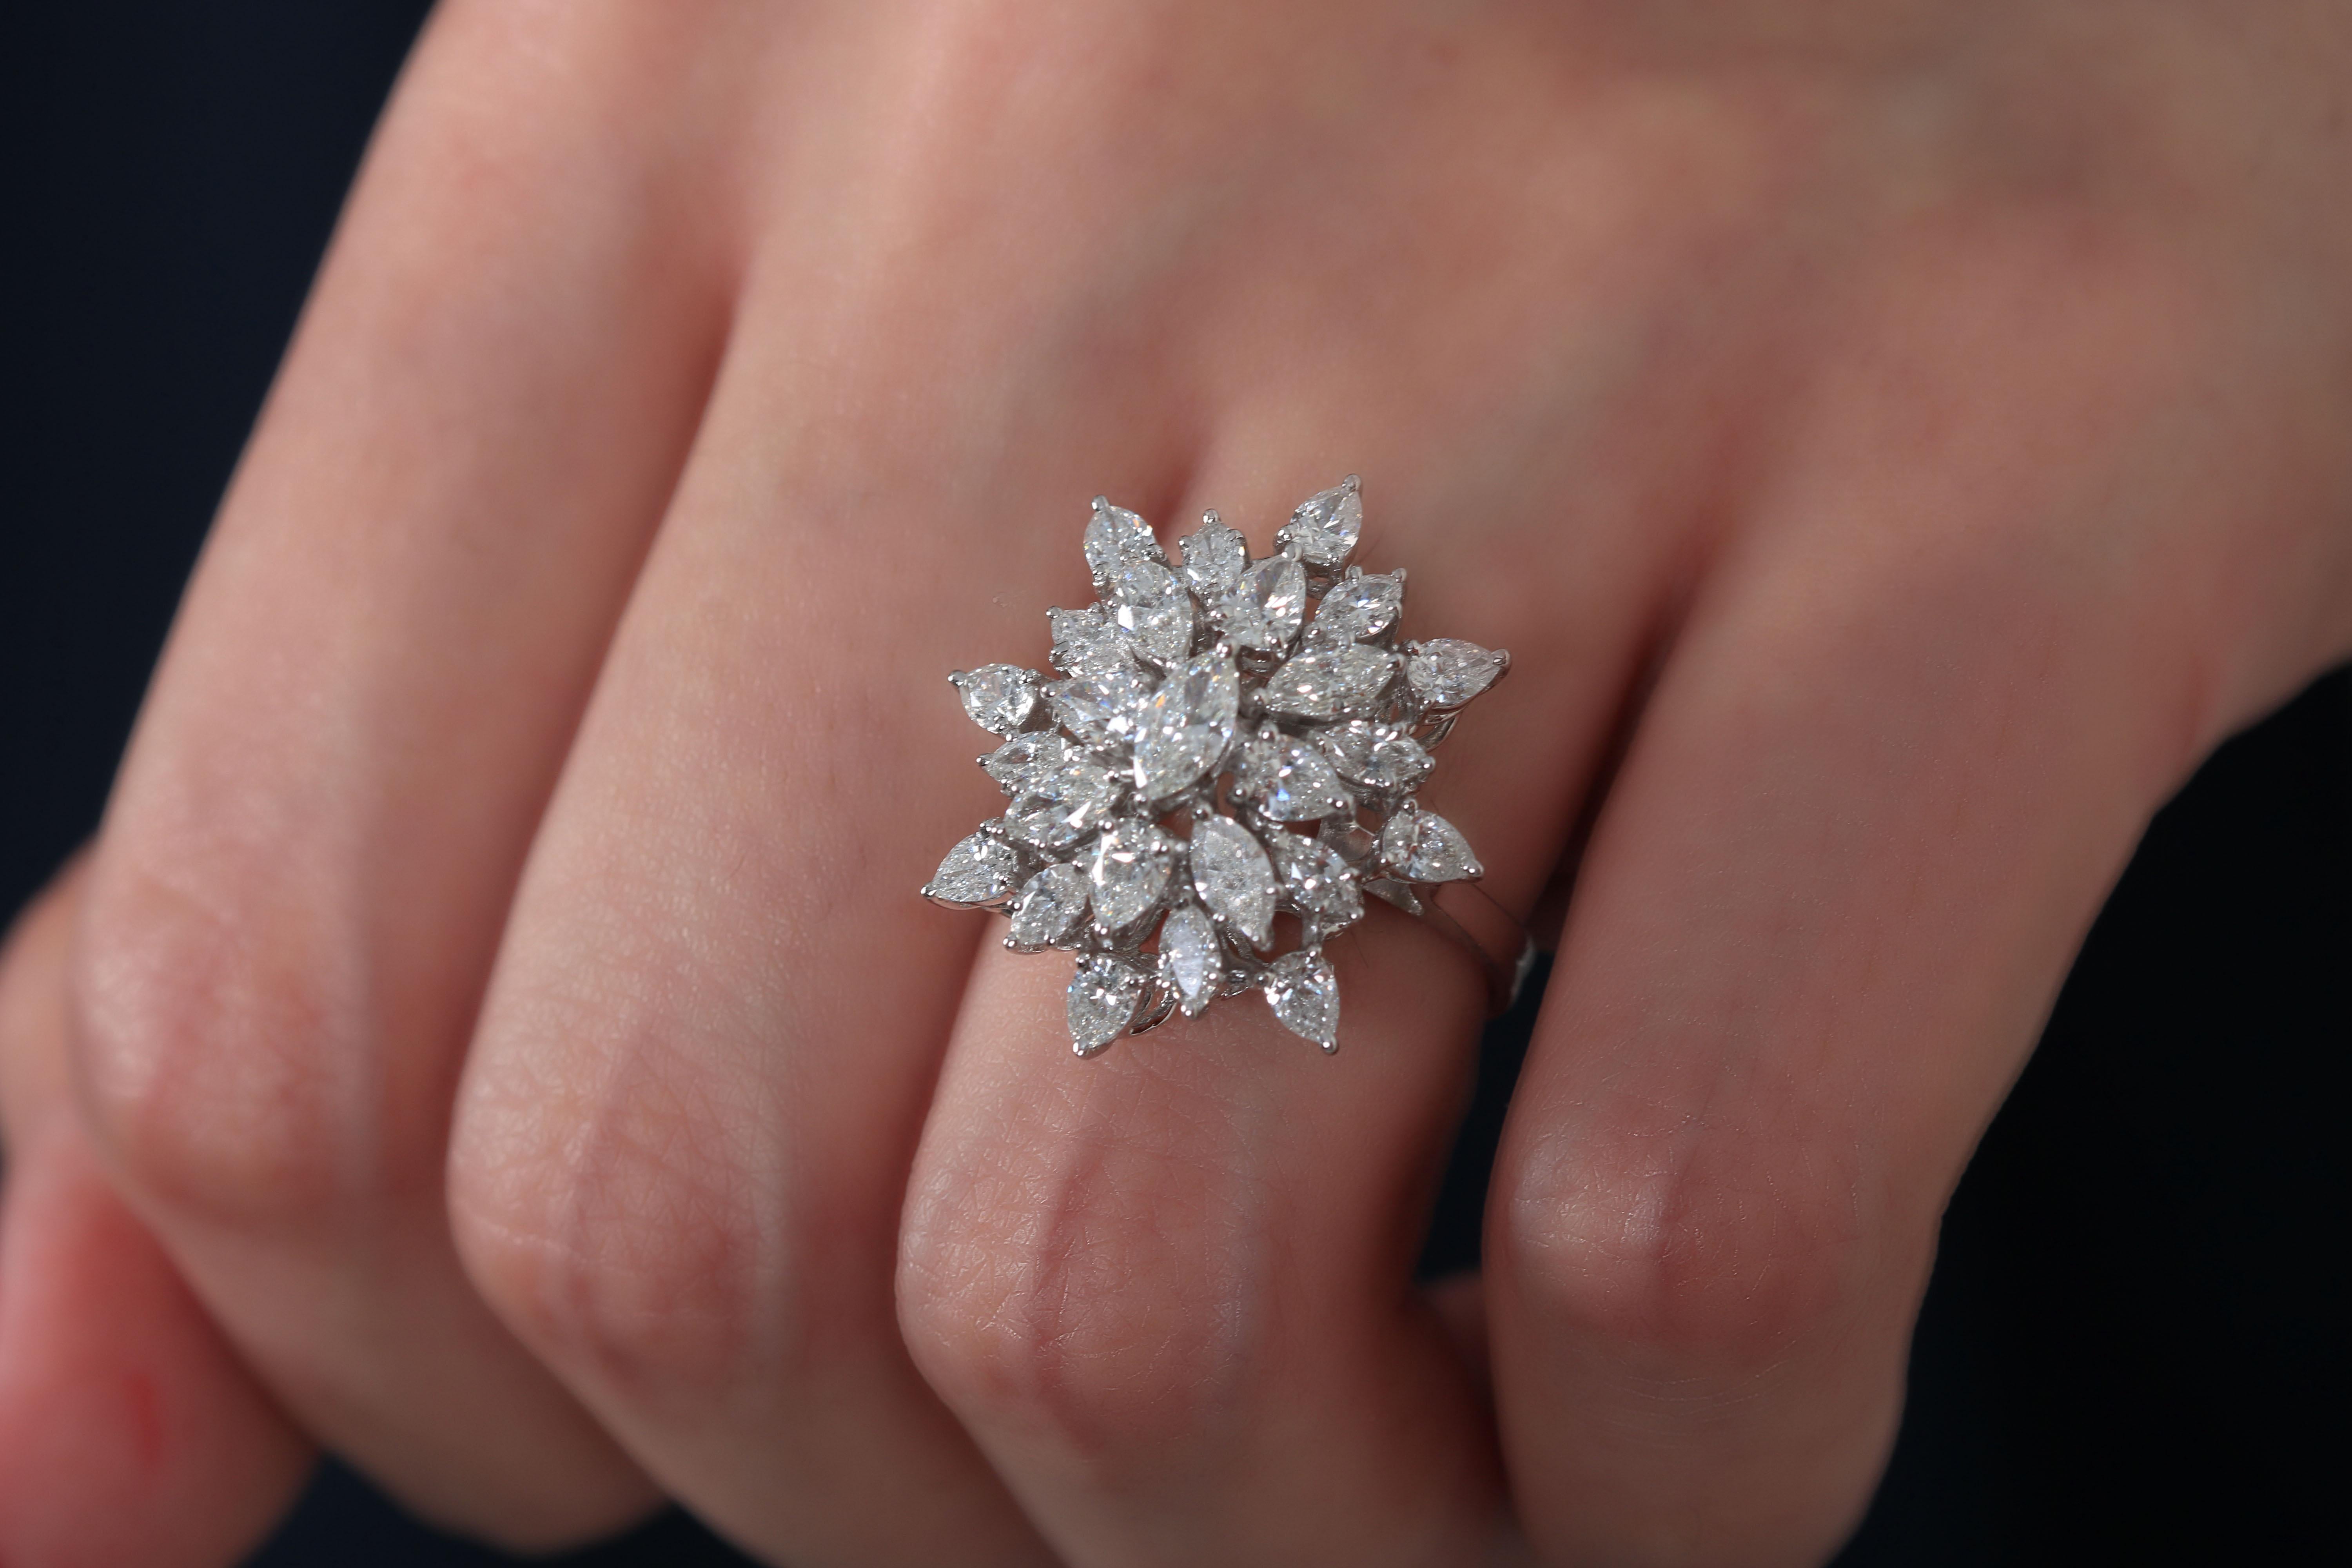 This diamond ring by Amwaj Jewelry features pear shape and marquise cut diamonds. Just intricate and dazzling, a perfect piece for any occasion.  

Diamond Clarity: VS SI / G H COLOR
Diamonds (Total Carat Weight: 3.05 ct) 
18 Karat White Gold
Ring